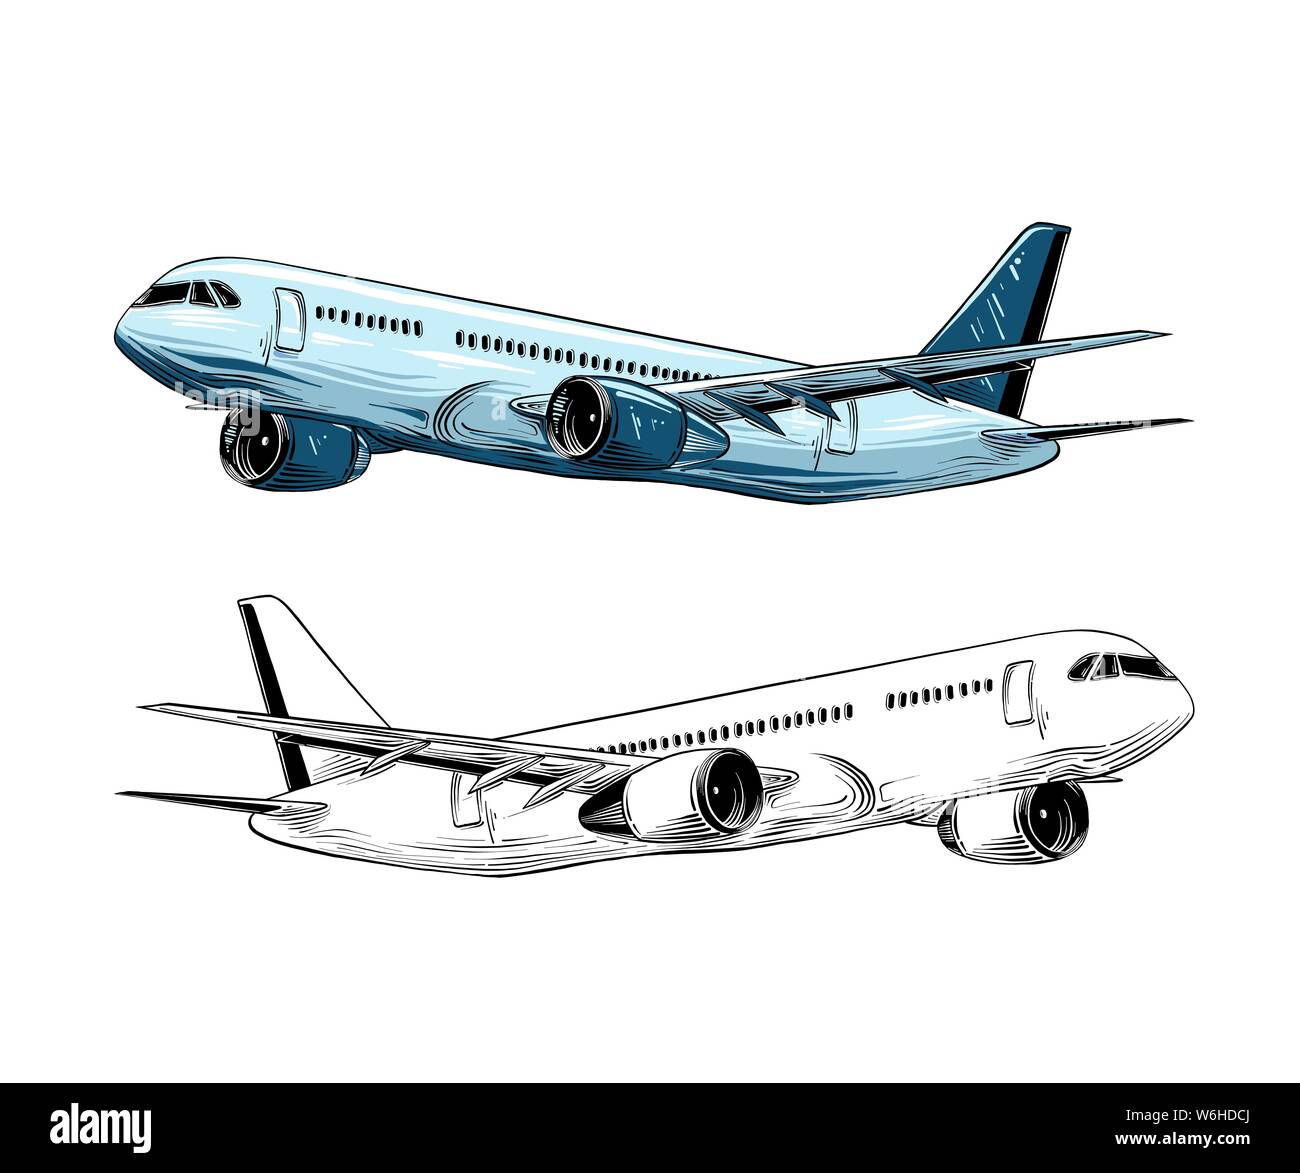 Jetliner hand drawn realistic doodle sketch tracing vector llustration  Airline Concept Travel Passenger plane Jet commercial airplane Stock Photo   Alamy